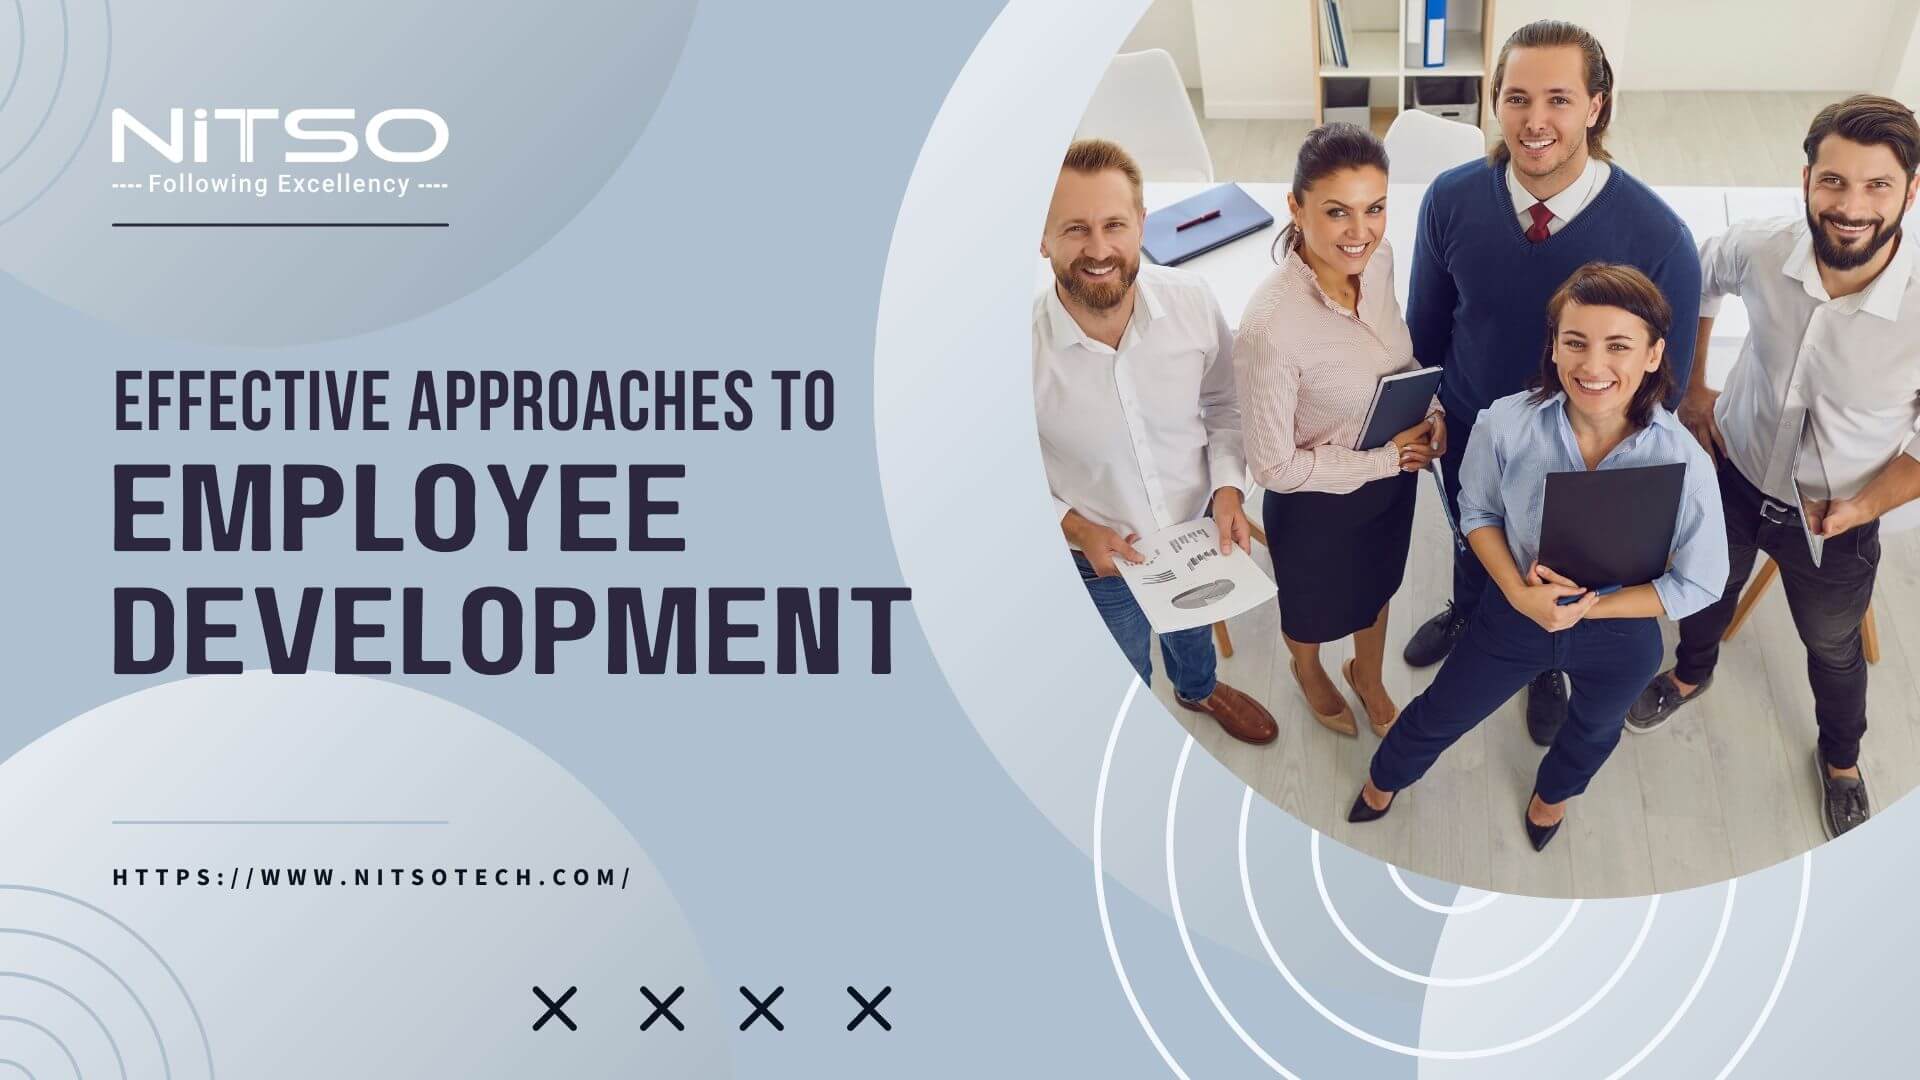 5 Effective Approaches to Employee Development in HRM